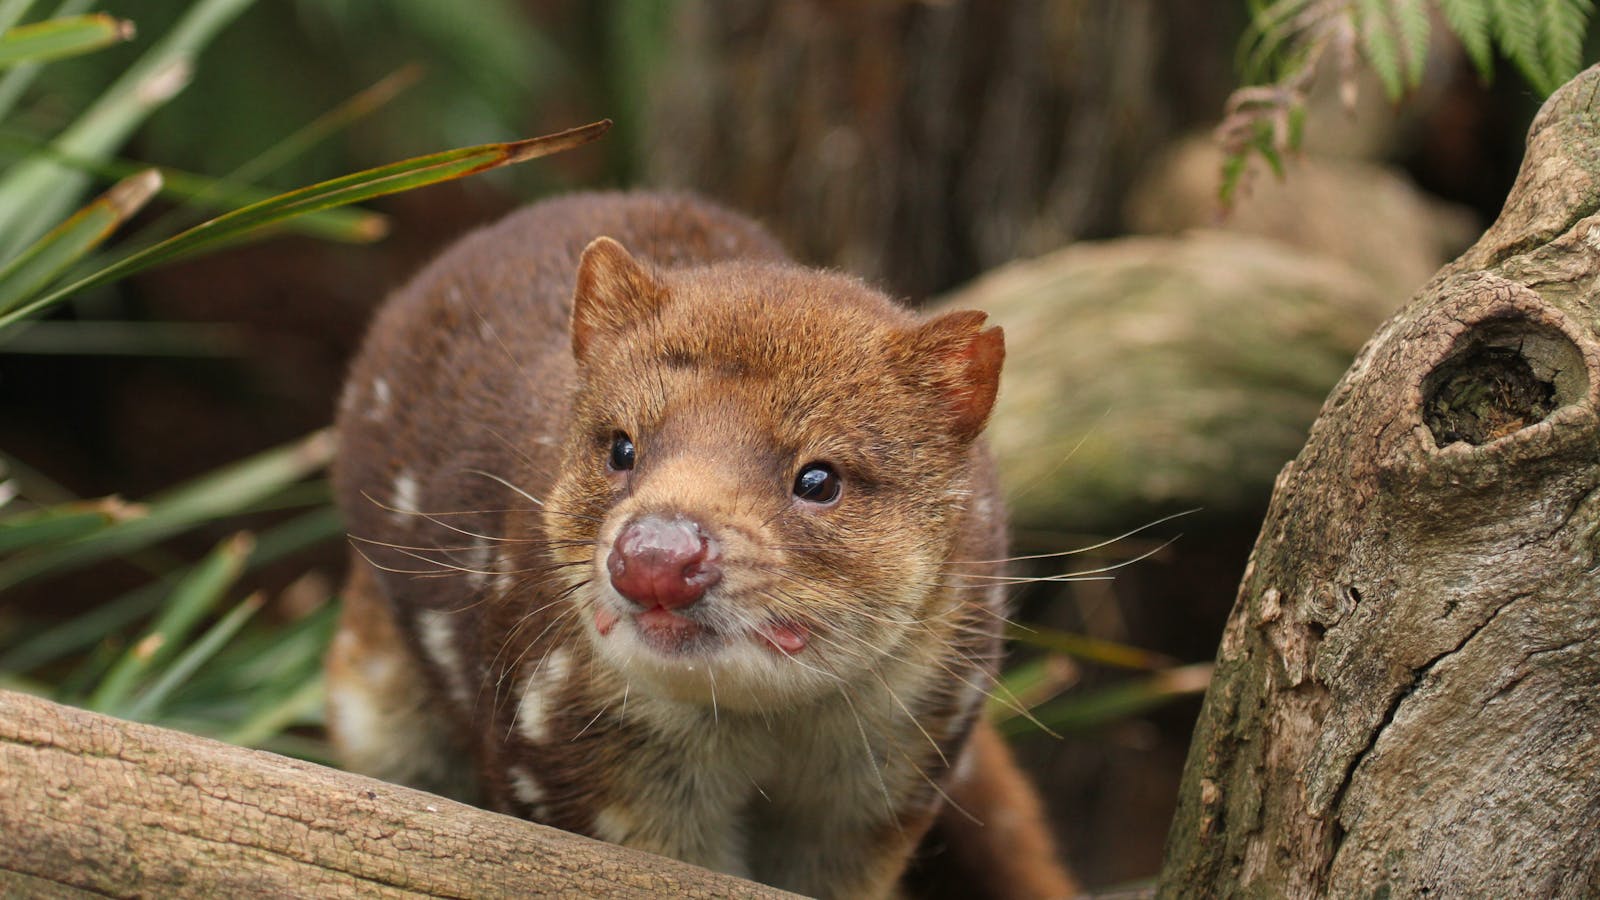 Spotted-tail quoll